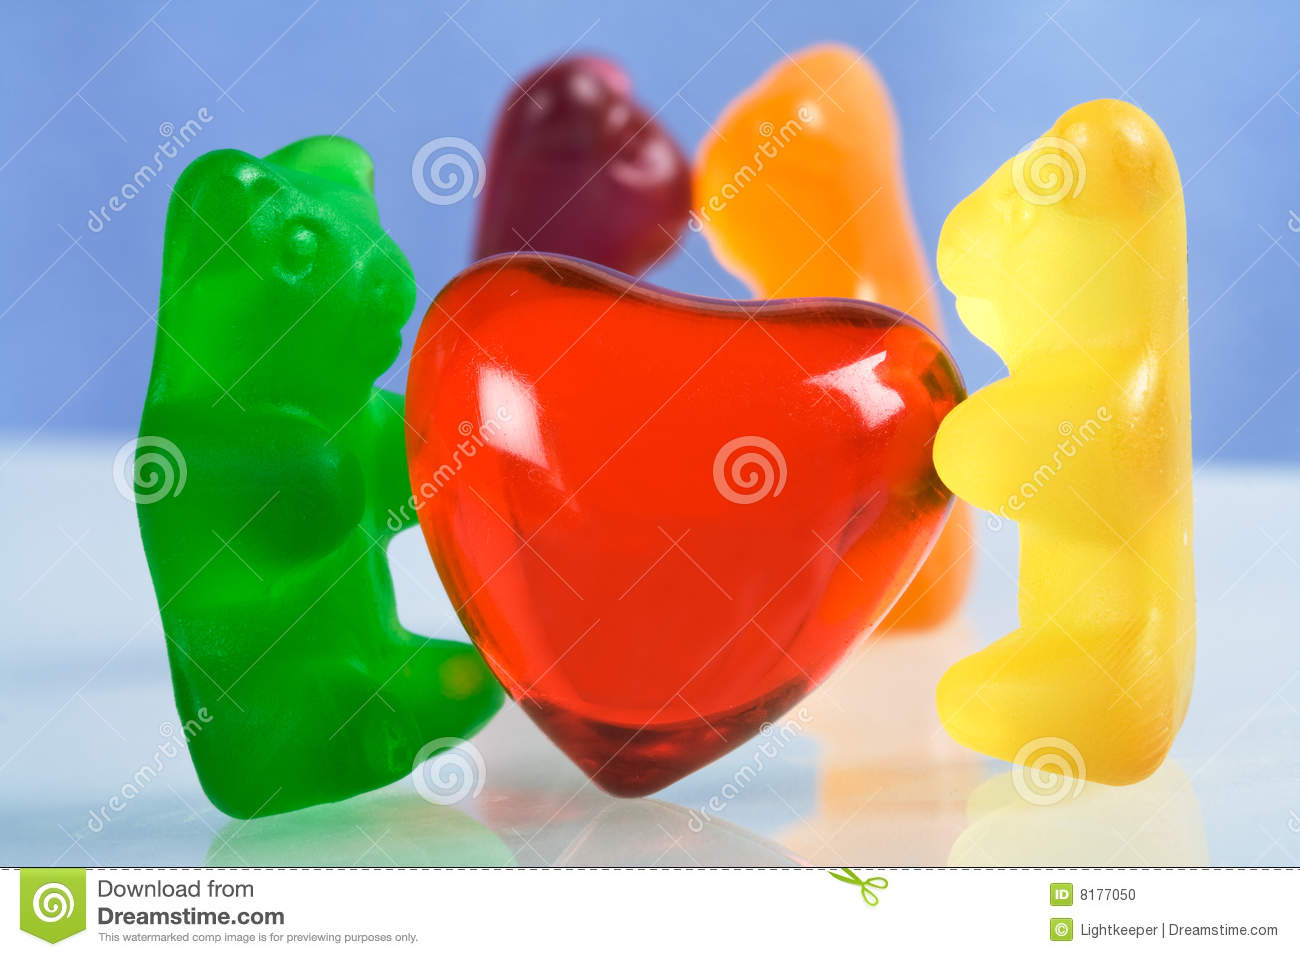 Gummy Bear Candy And Red Heart Editorial Image   Image  8177050